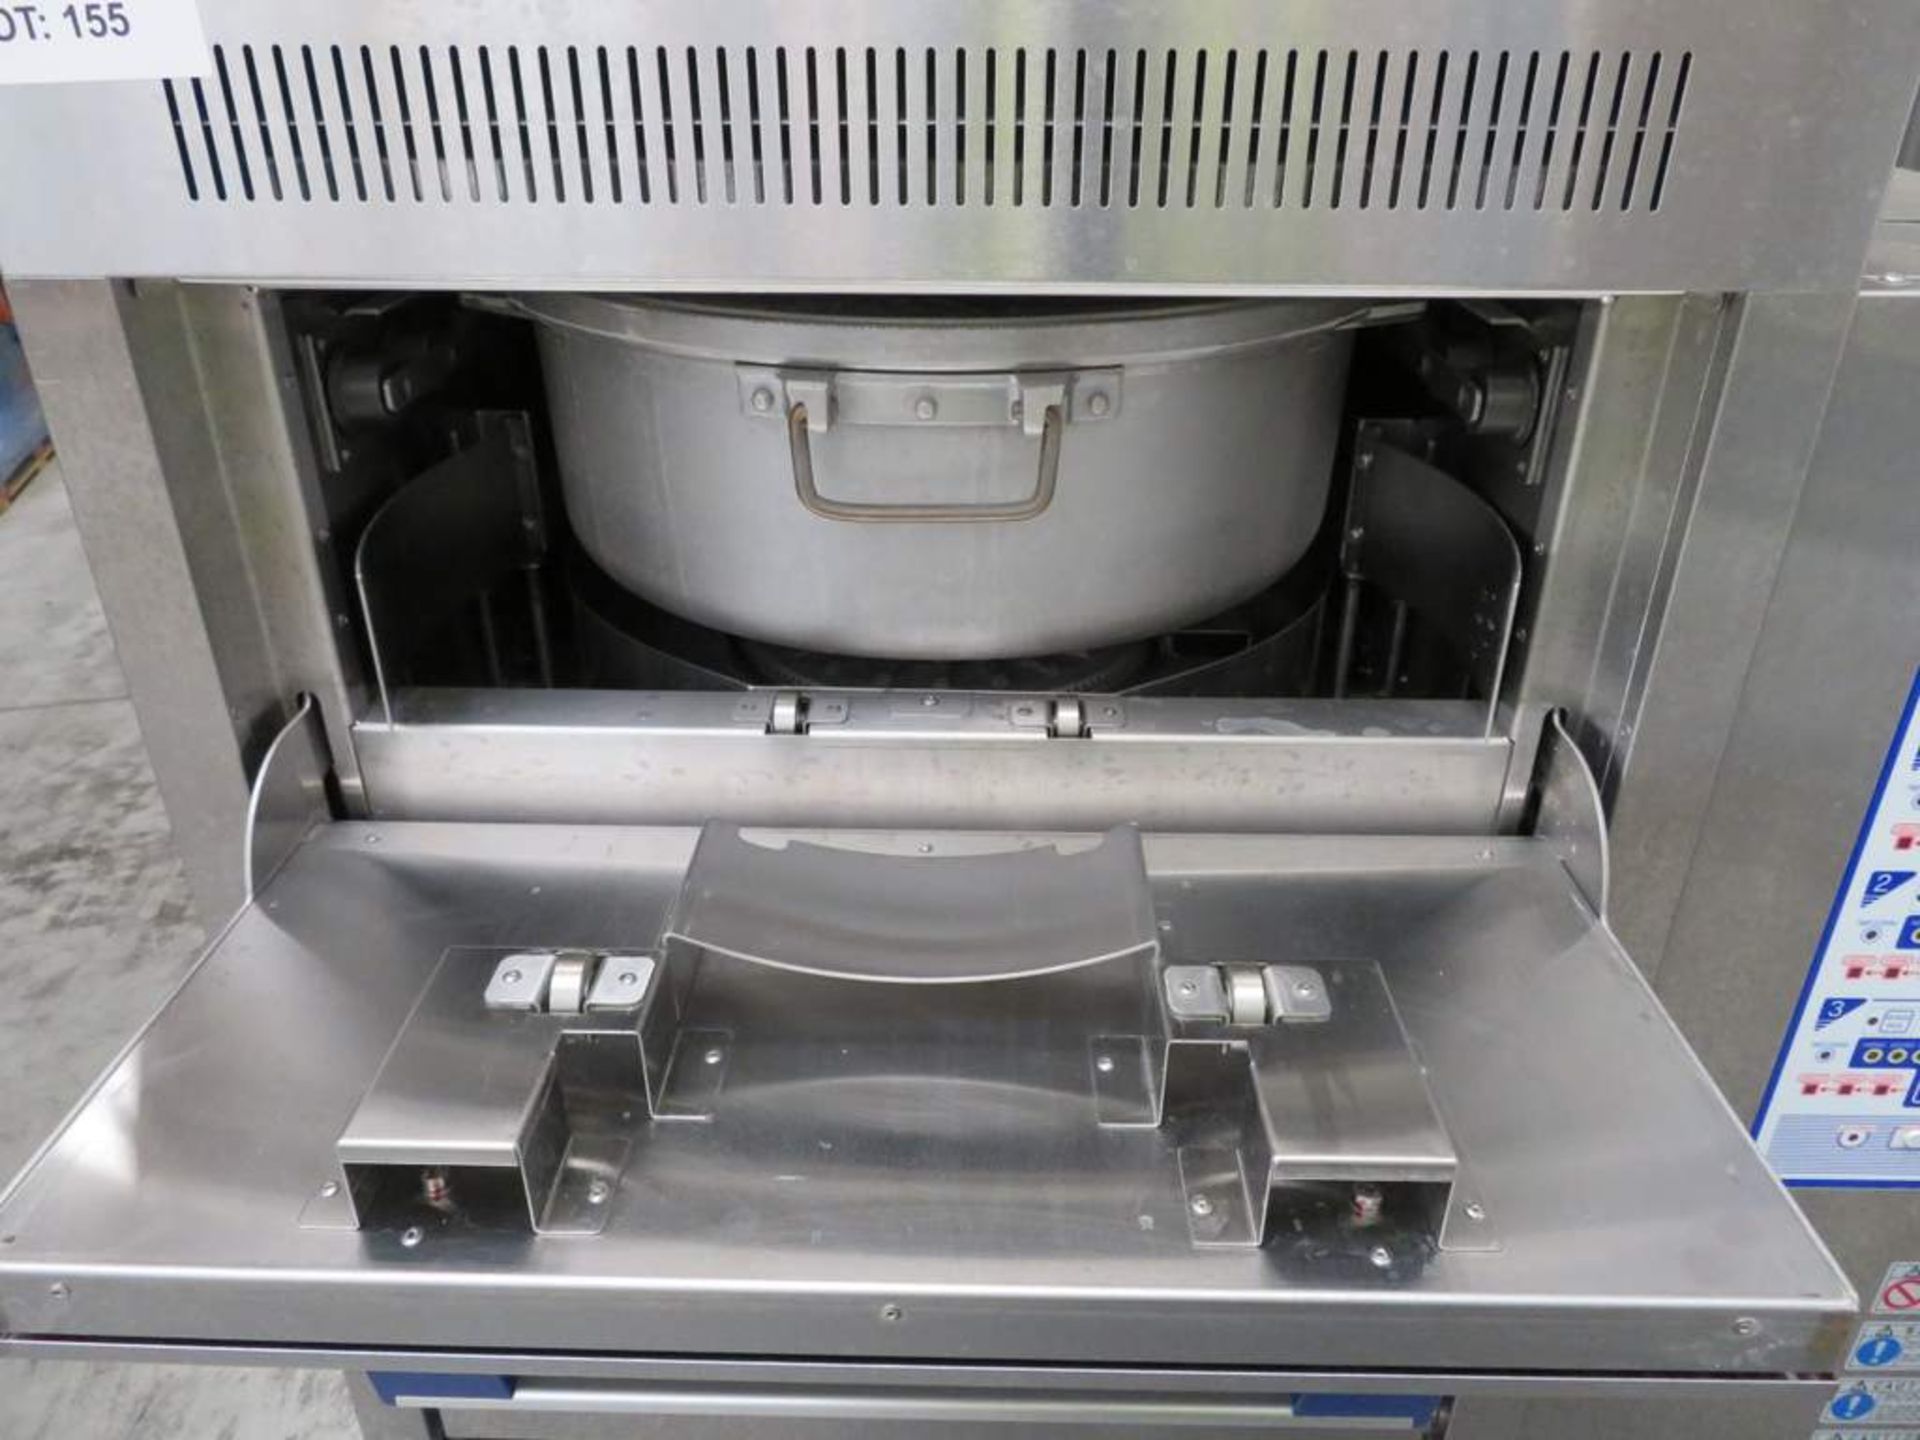 Sharipro computerized cabinet type rice cooker. Model: RMG-153R-SC - Image 5 of 7